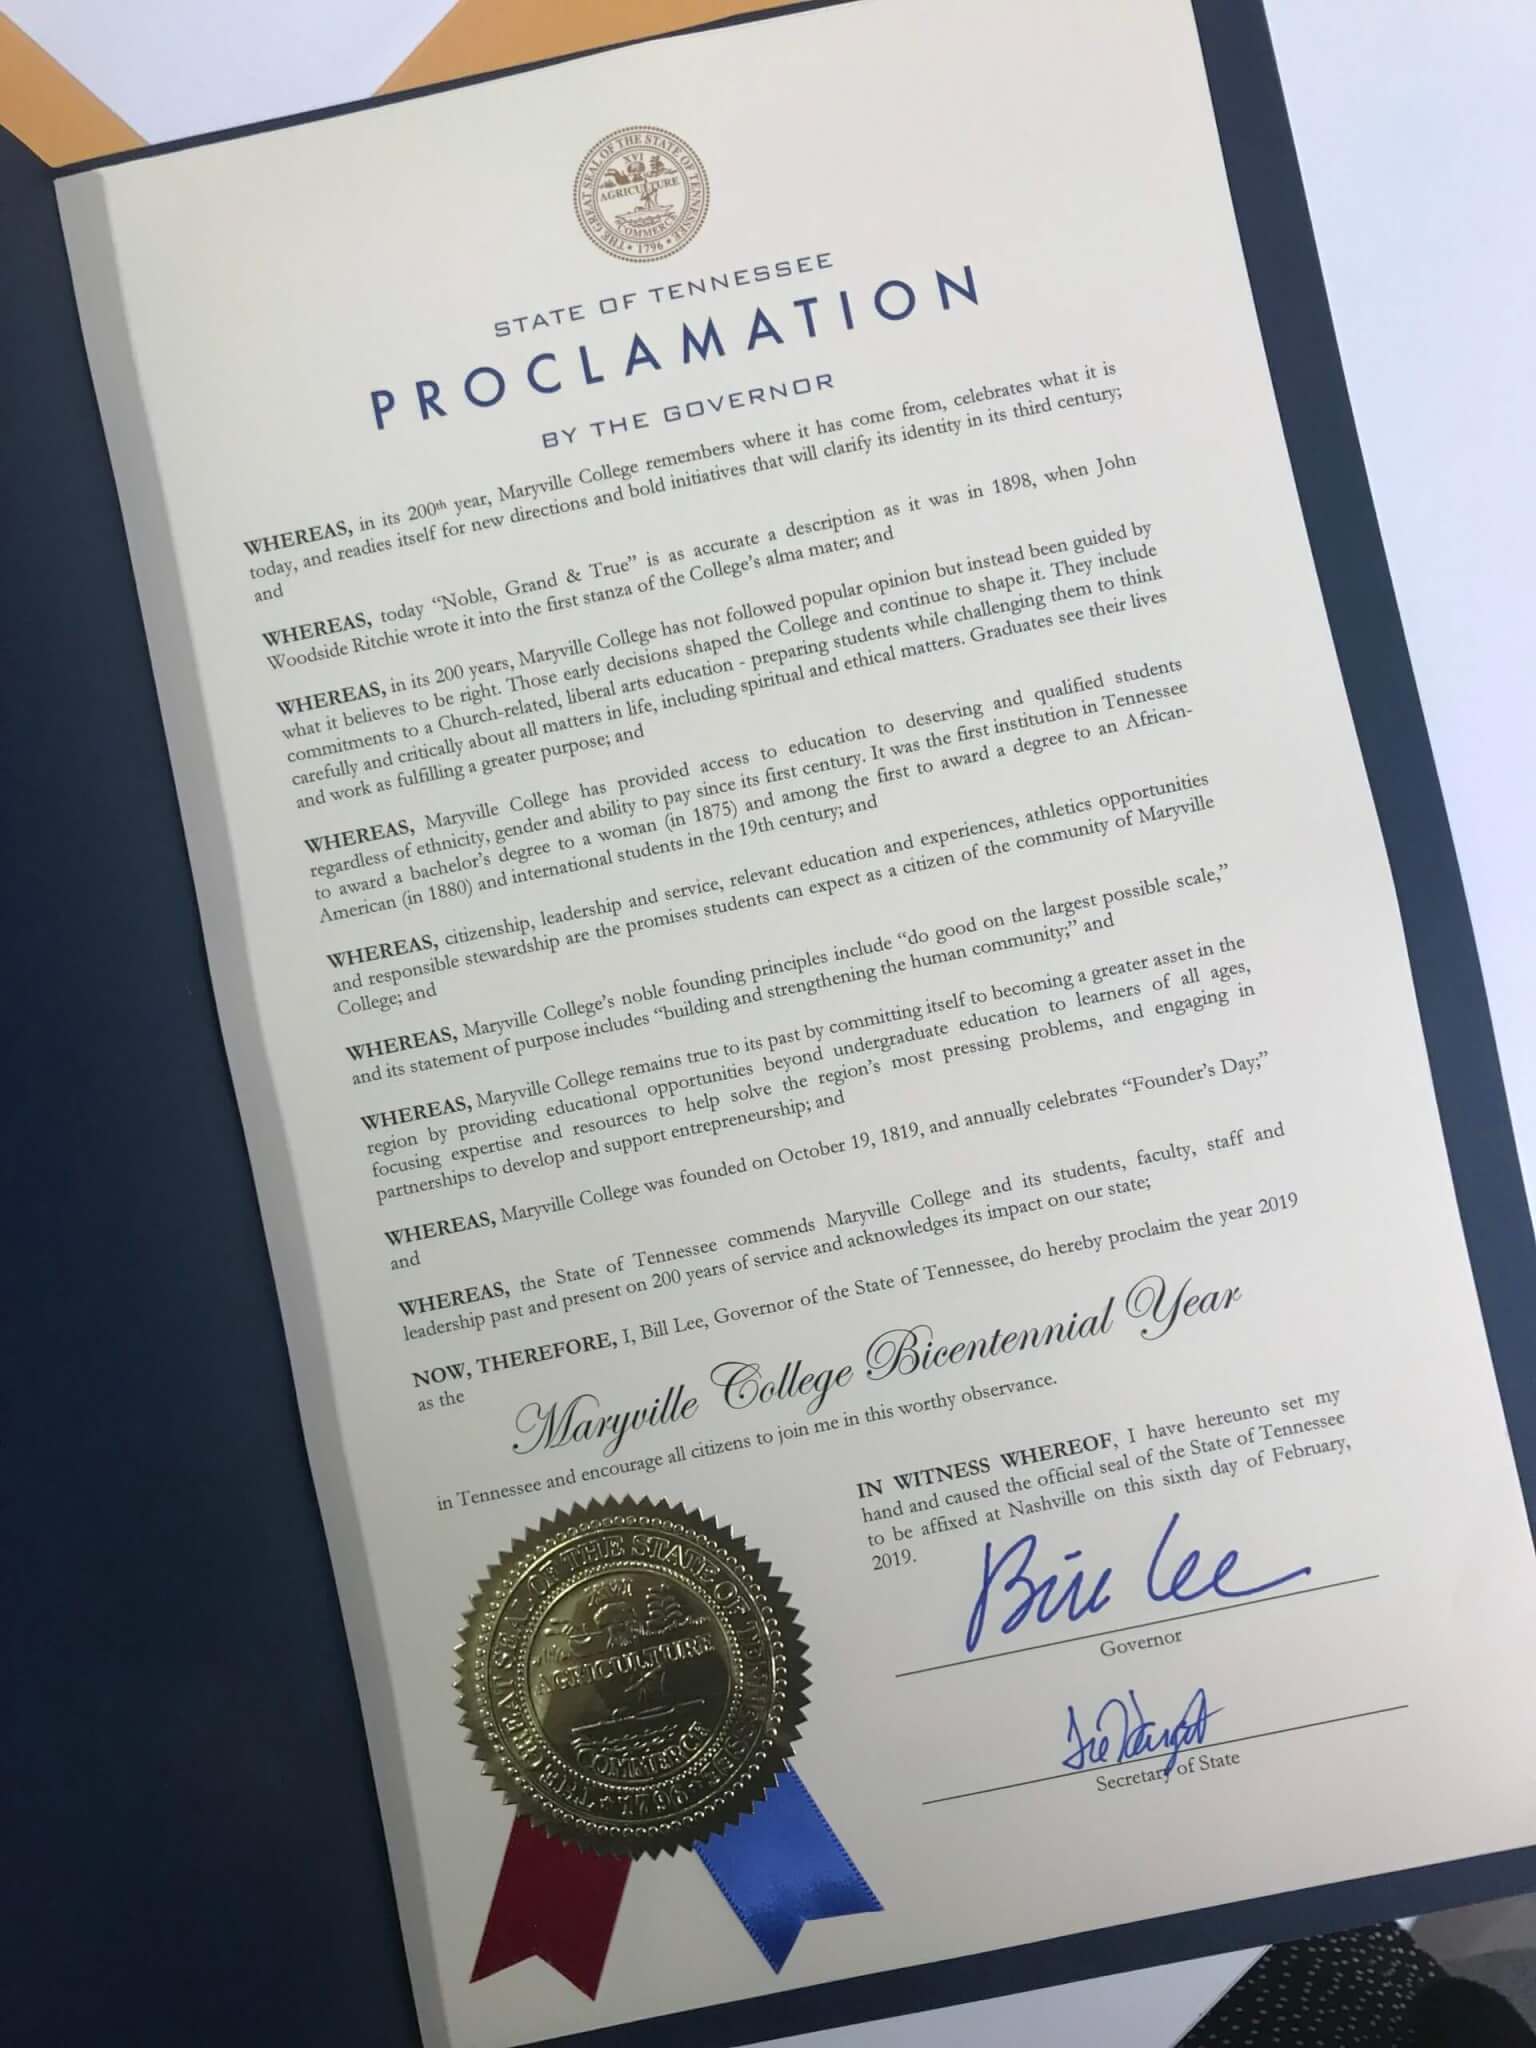 Governor Proclamation for Bicentennial